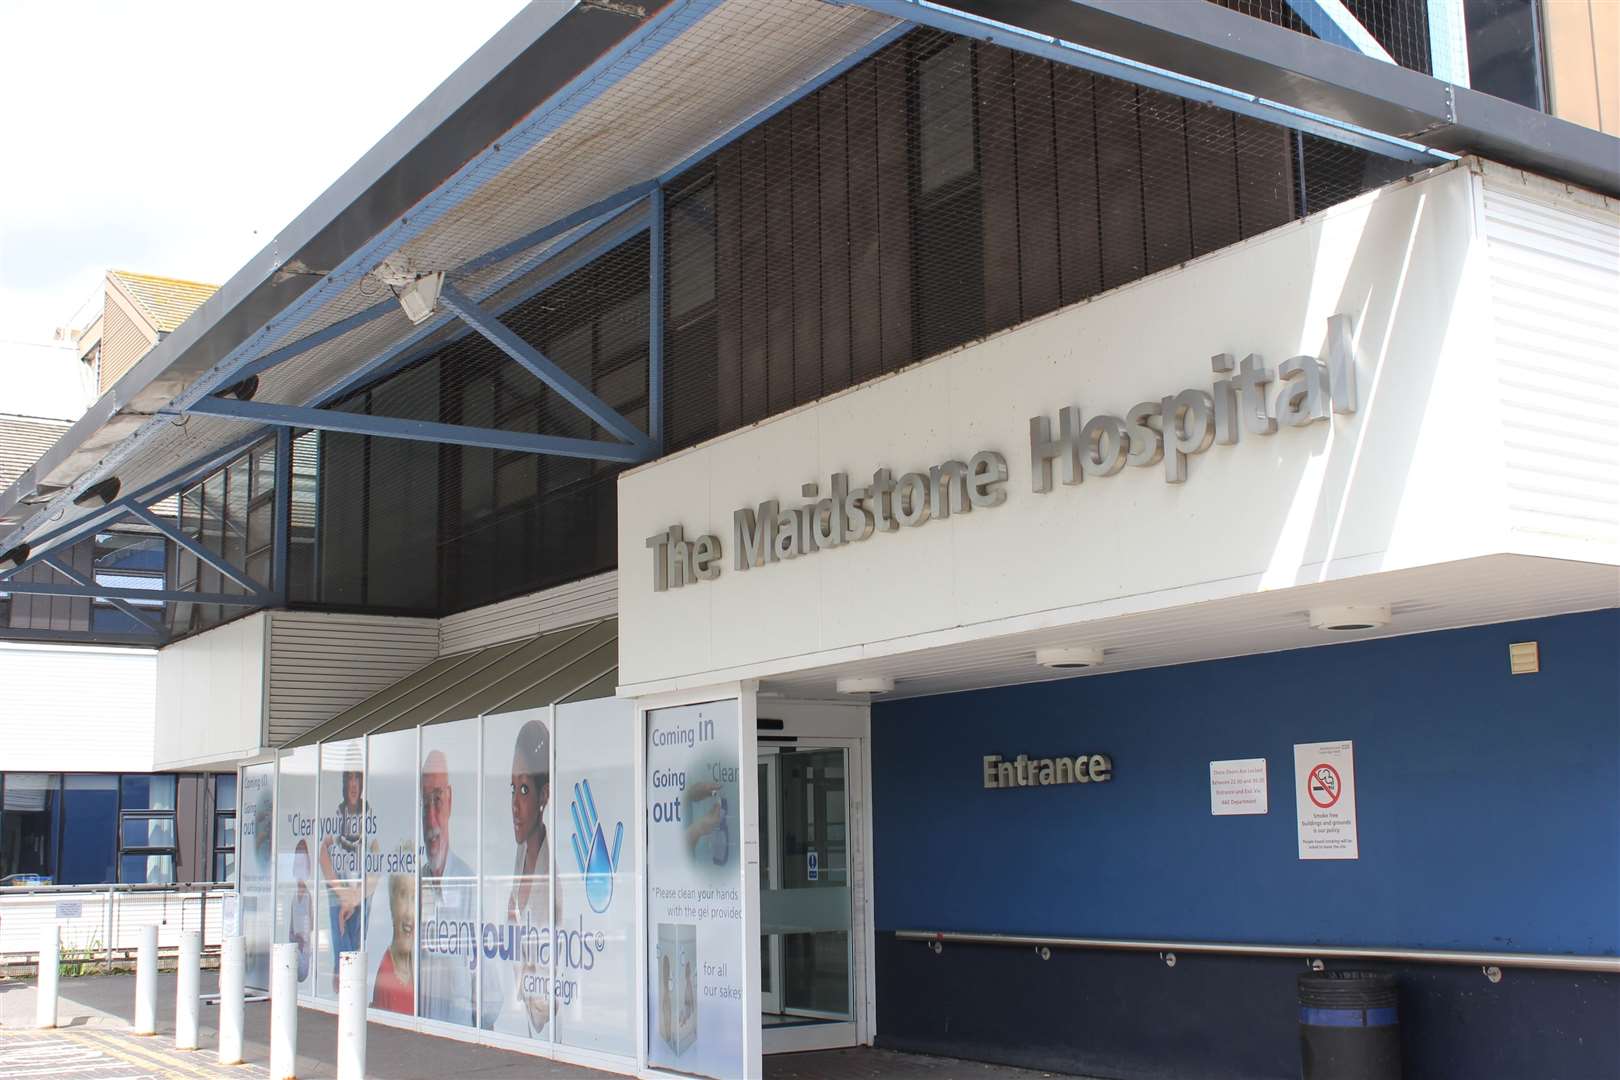 Staff at Maidstone Hospital said they couldn't give Emily a test